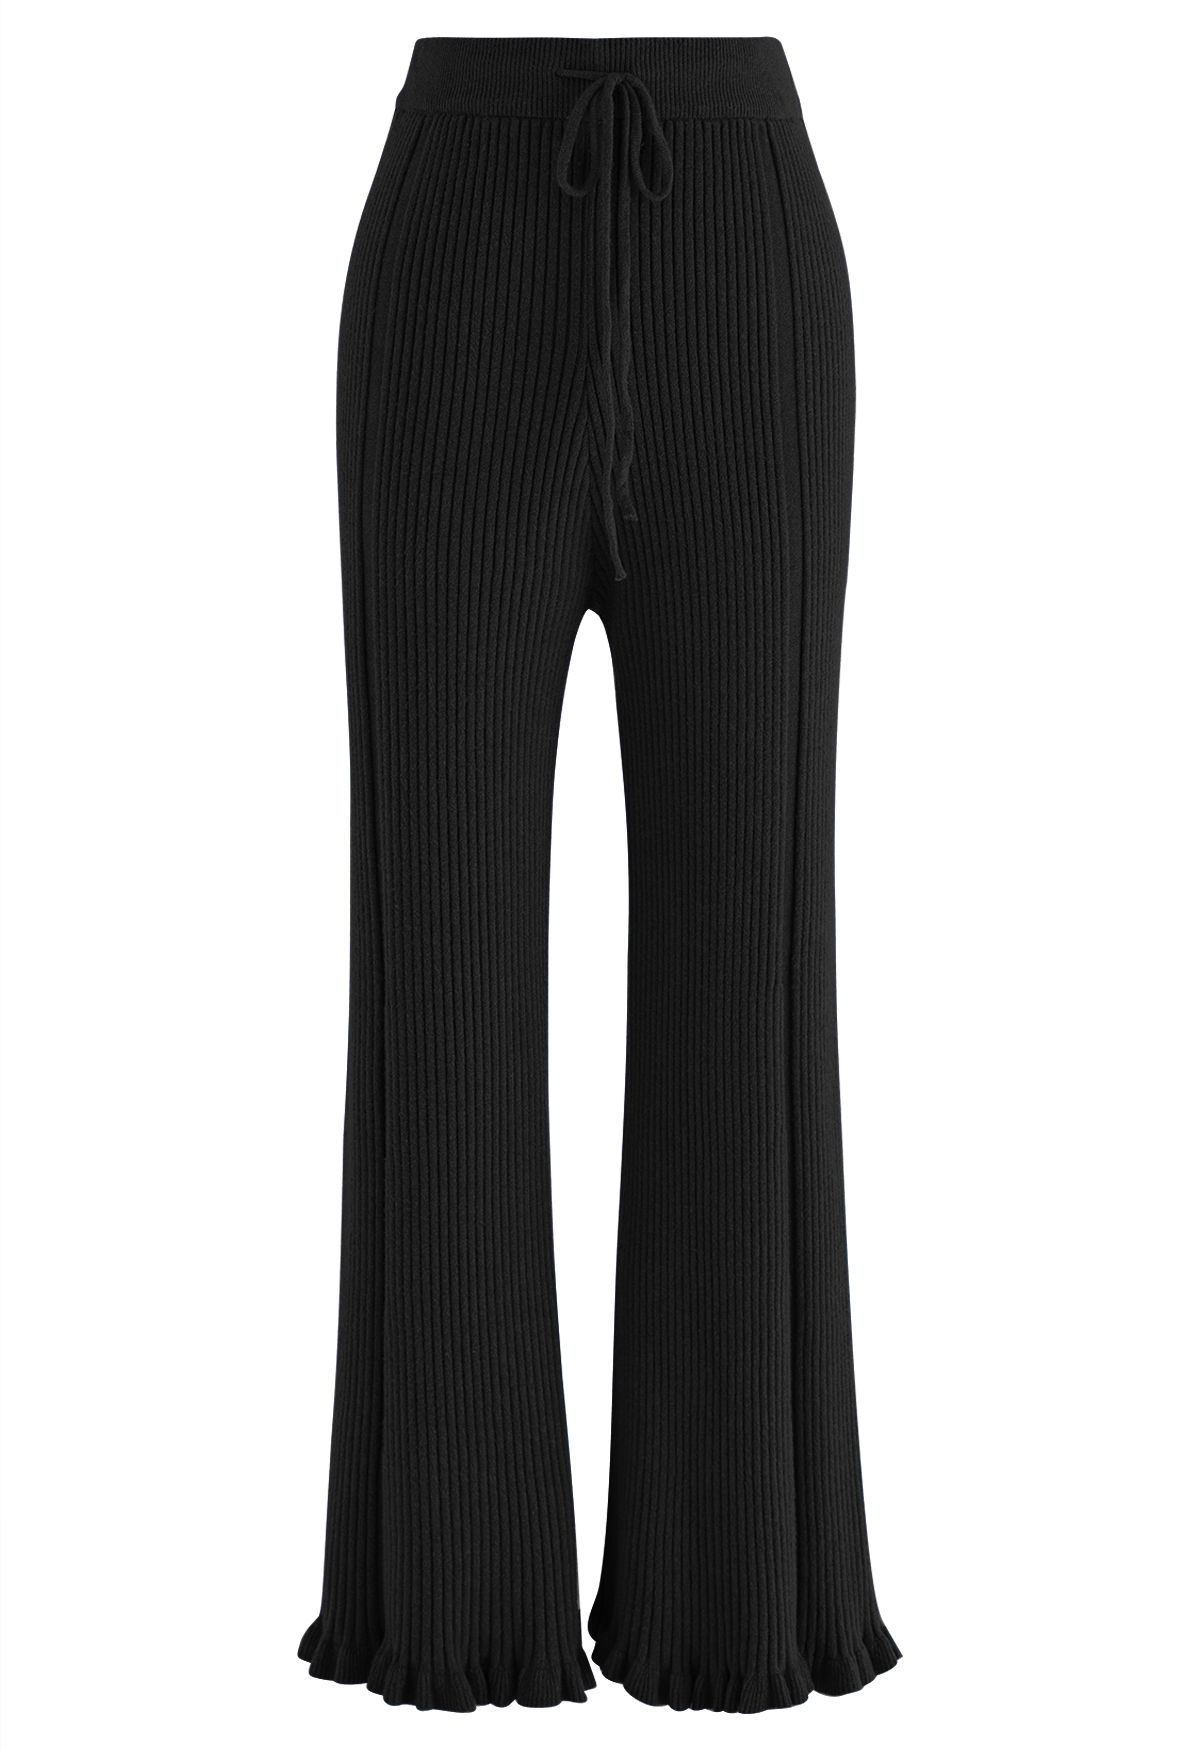 Ruffle Flare Hem Ribbed Knit Pants in Black - Retro, Indie and